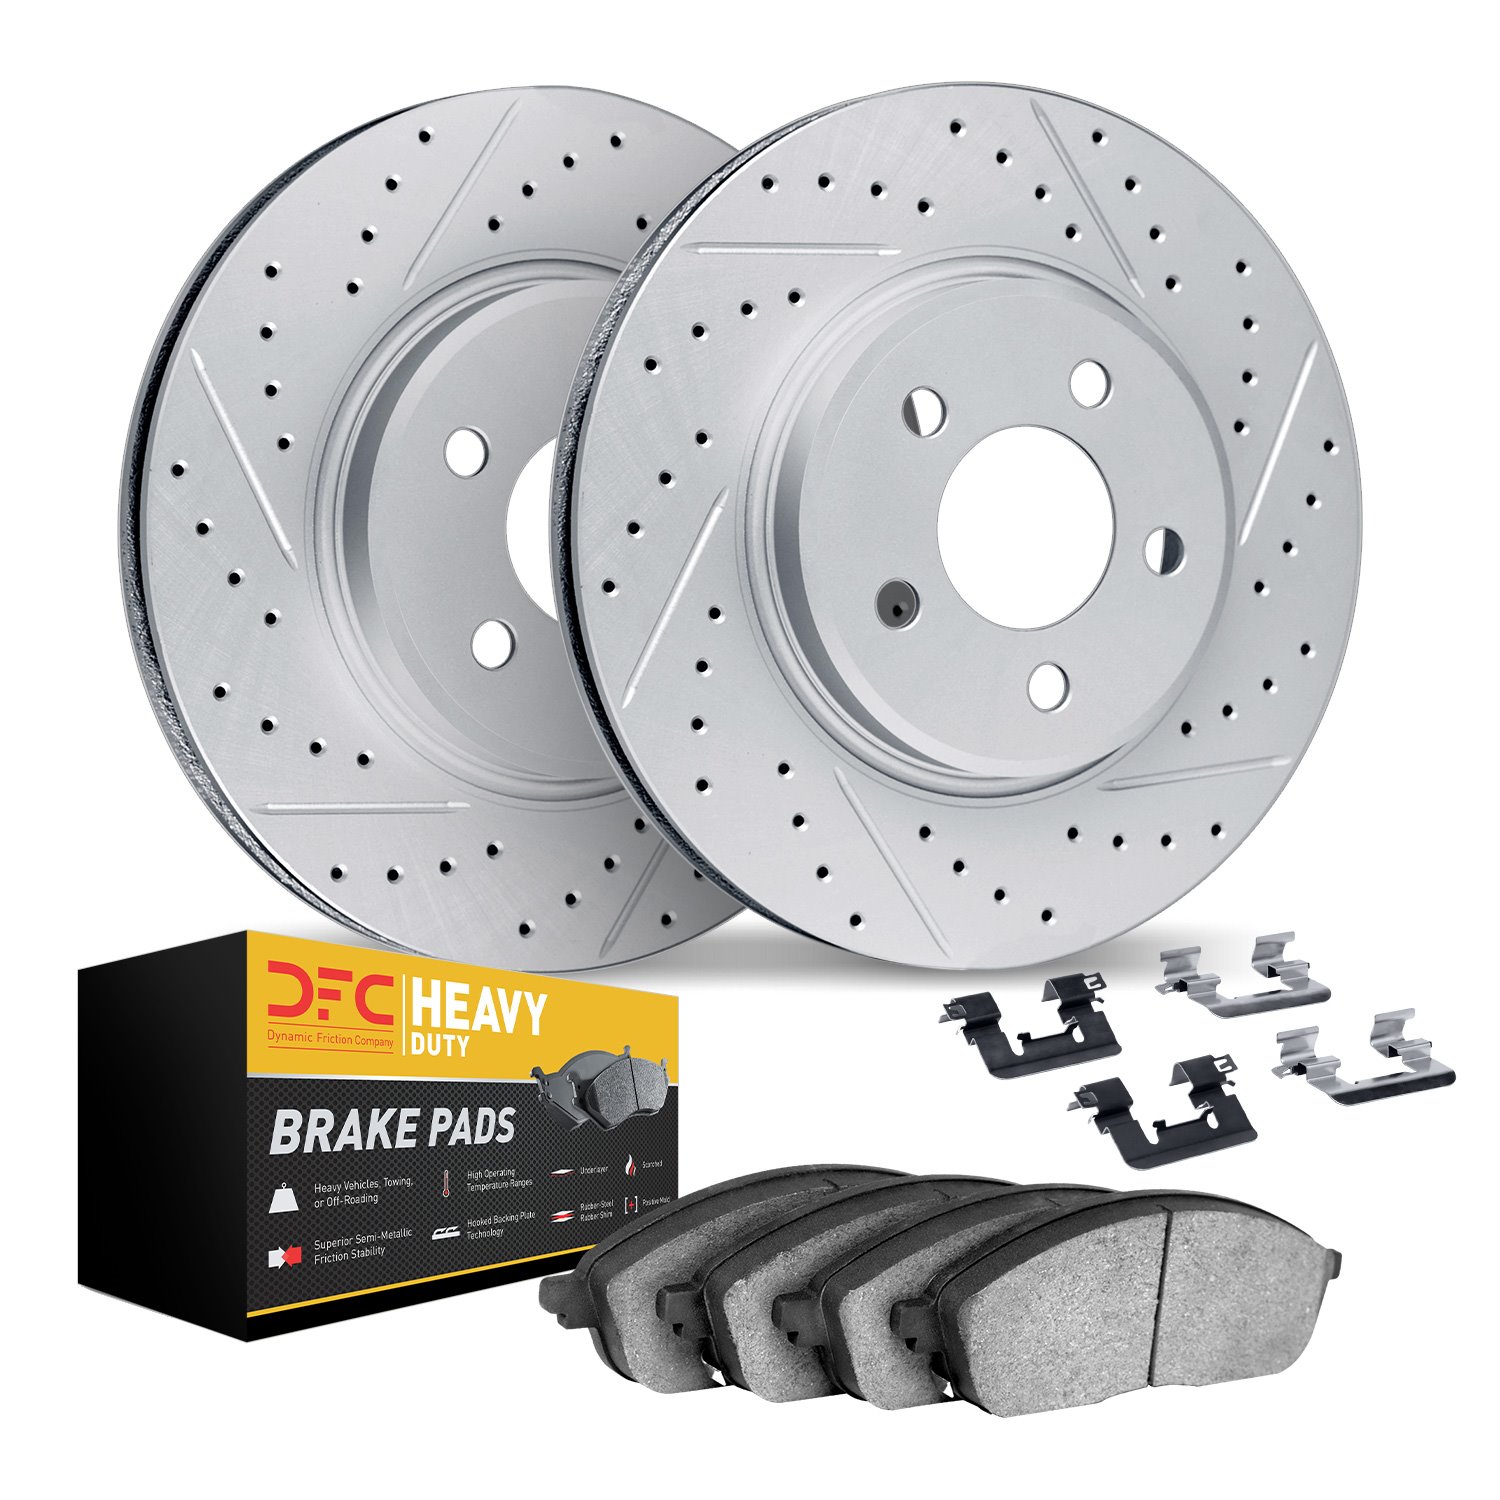 2212-39016 Geoperformance Drilled/Slotted Rotors w/Heavy-Duty Pads Kit & Hardware, Fits Select Mopar, Position: Rear